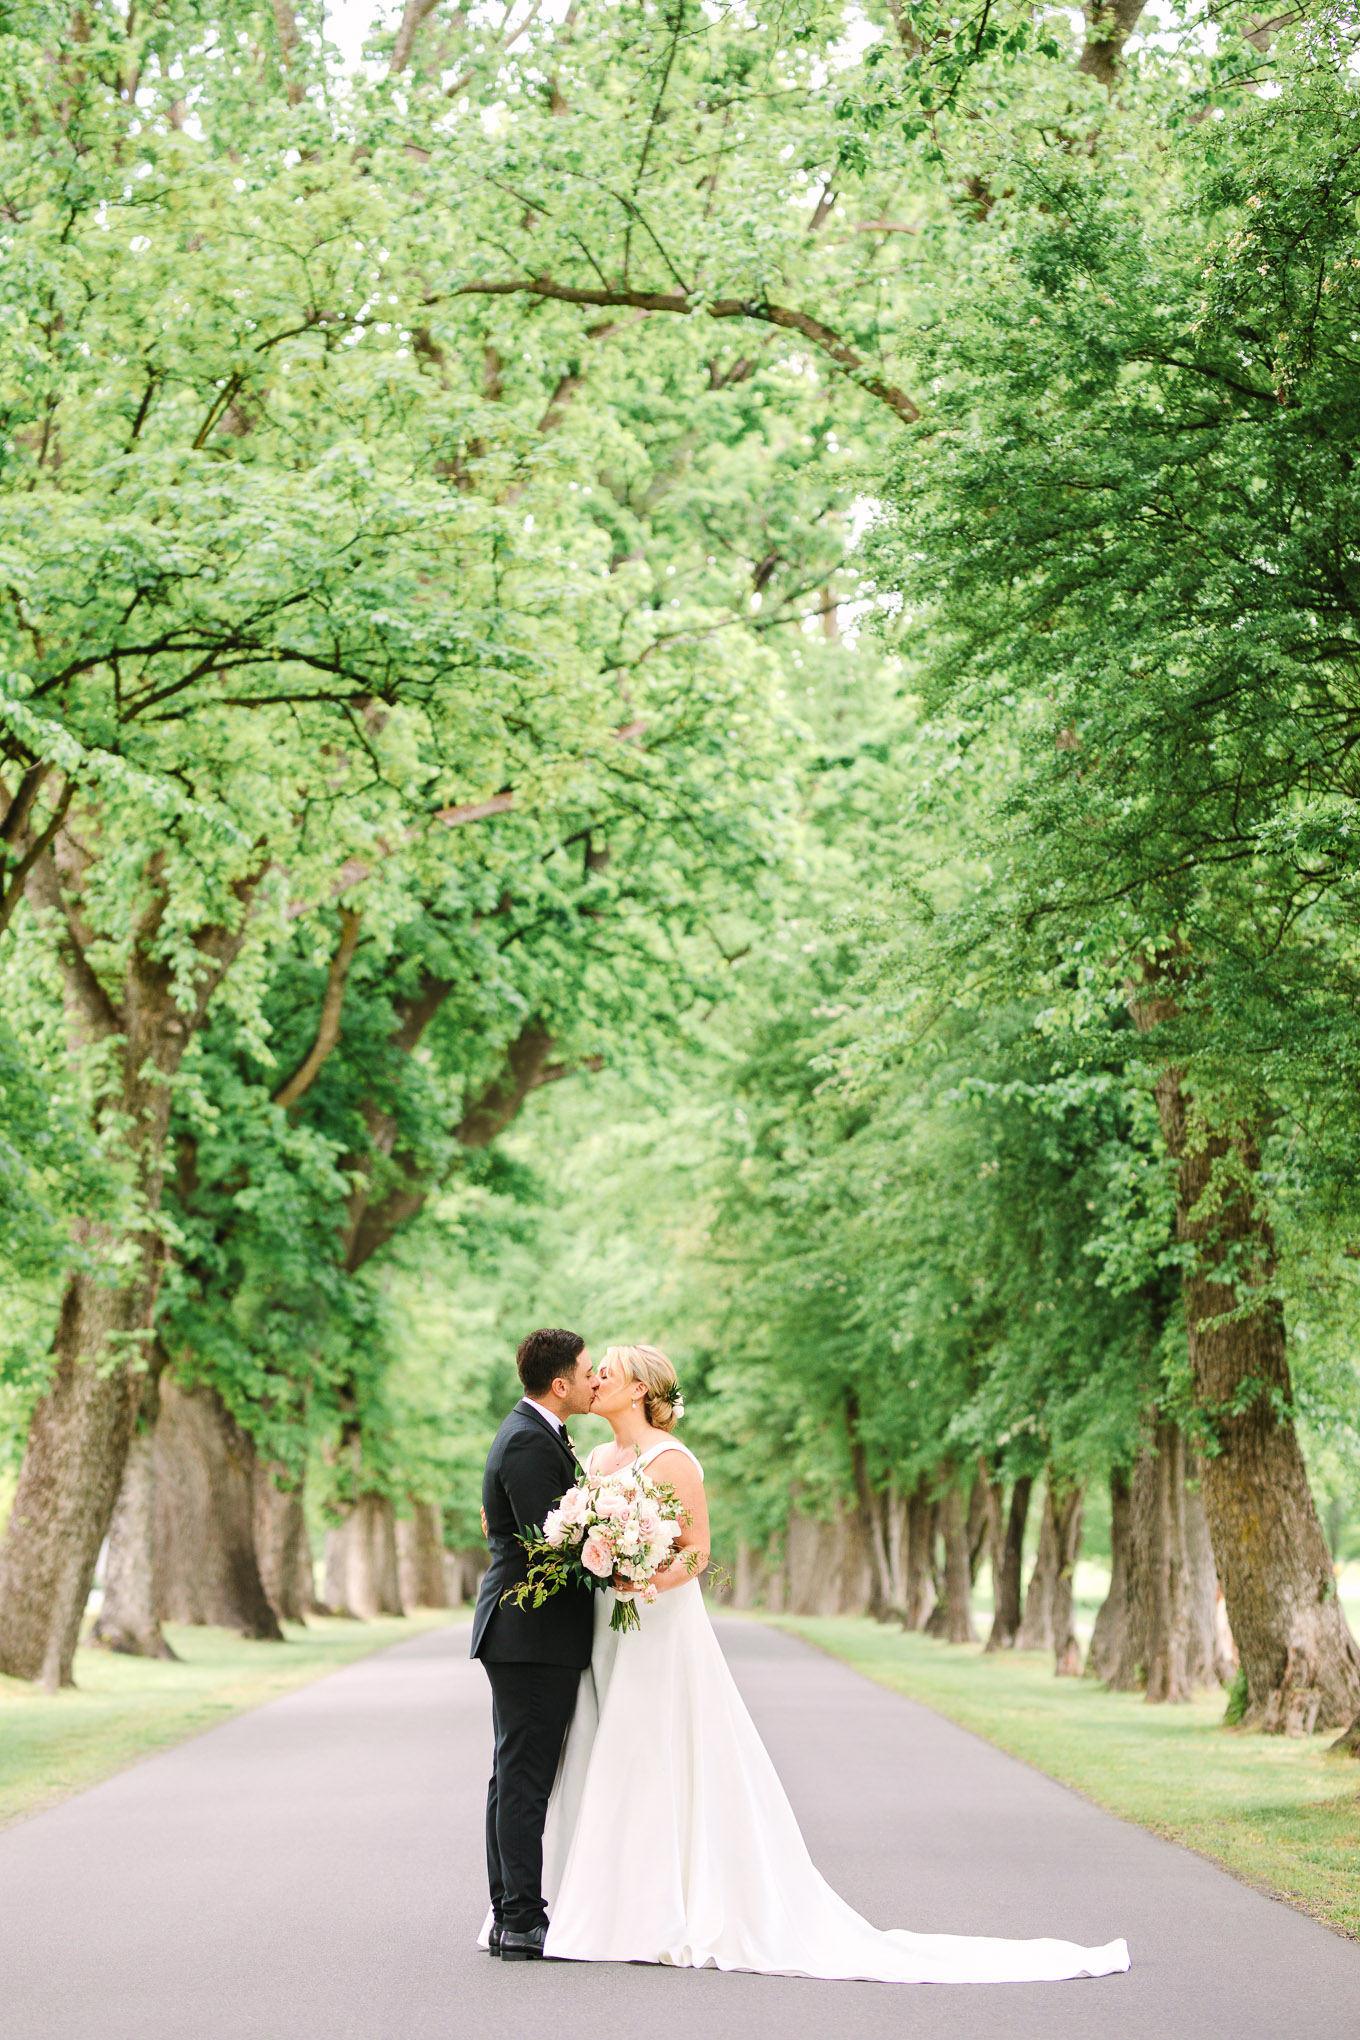 Bride and groom portrait in tree-lined road. Millbrook Resort Queenstown New Zealand wedding by Mary Costa Photography | www.marycostaweddings.com